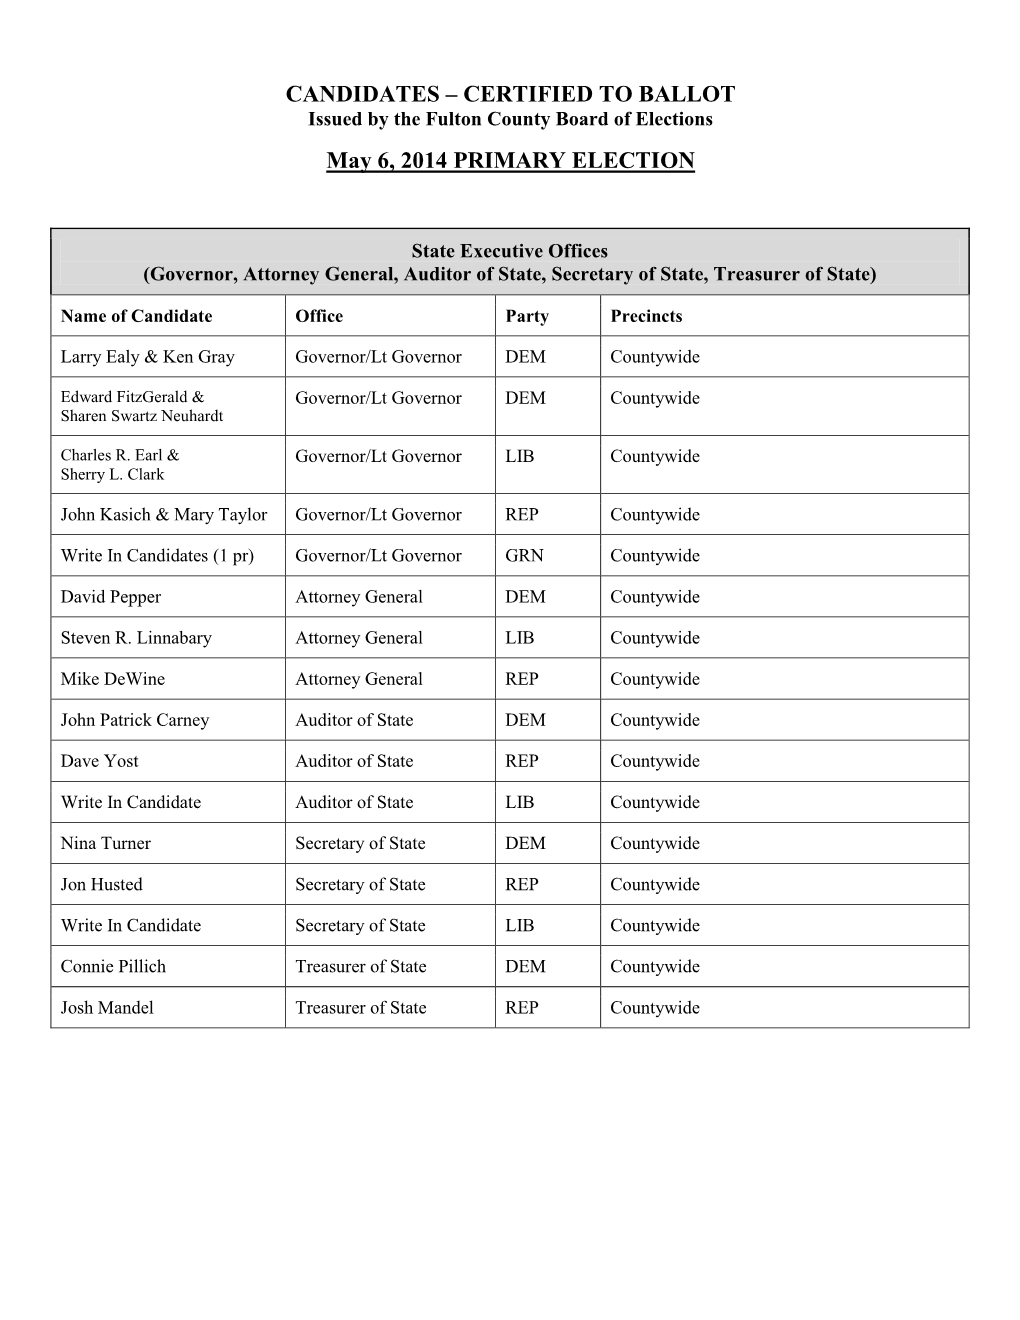 CANDIDATES – CERTIFIED to BALLOT Issued by the Fulton County Board of Elections